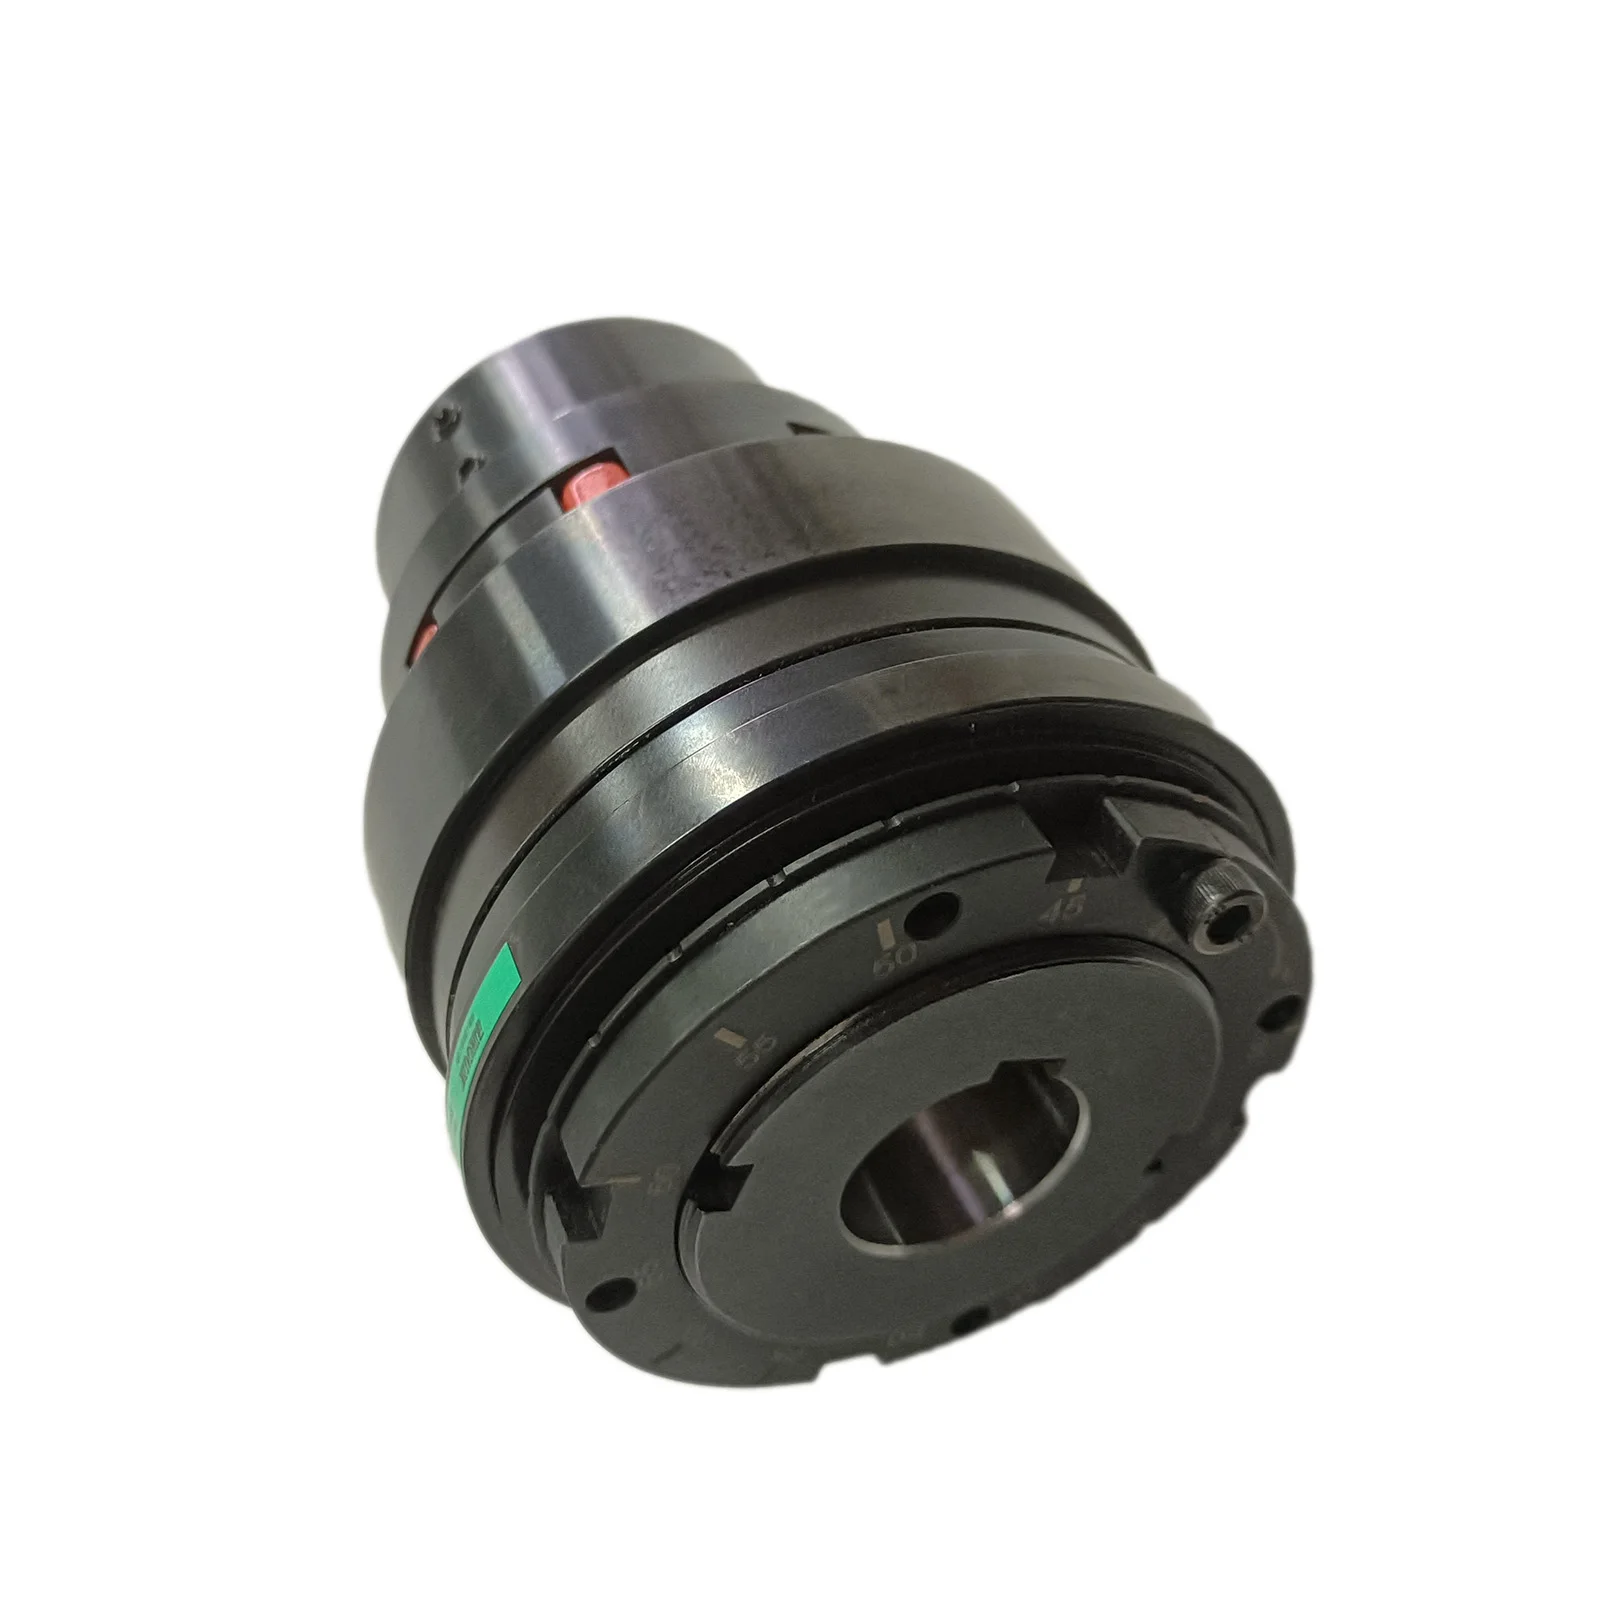 

BMA5-G Zero Backlash Ball Torque Limiter Torque Limiter Safety Coupling overload clutch torque limiters with coupling